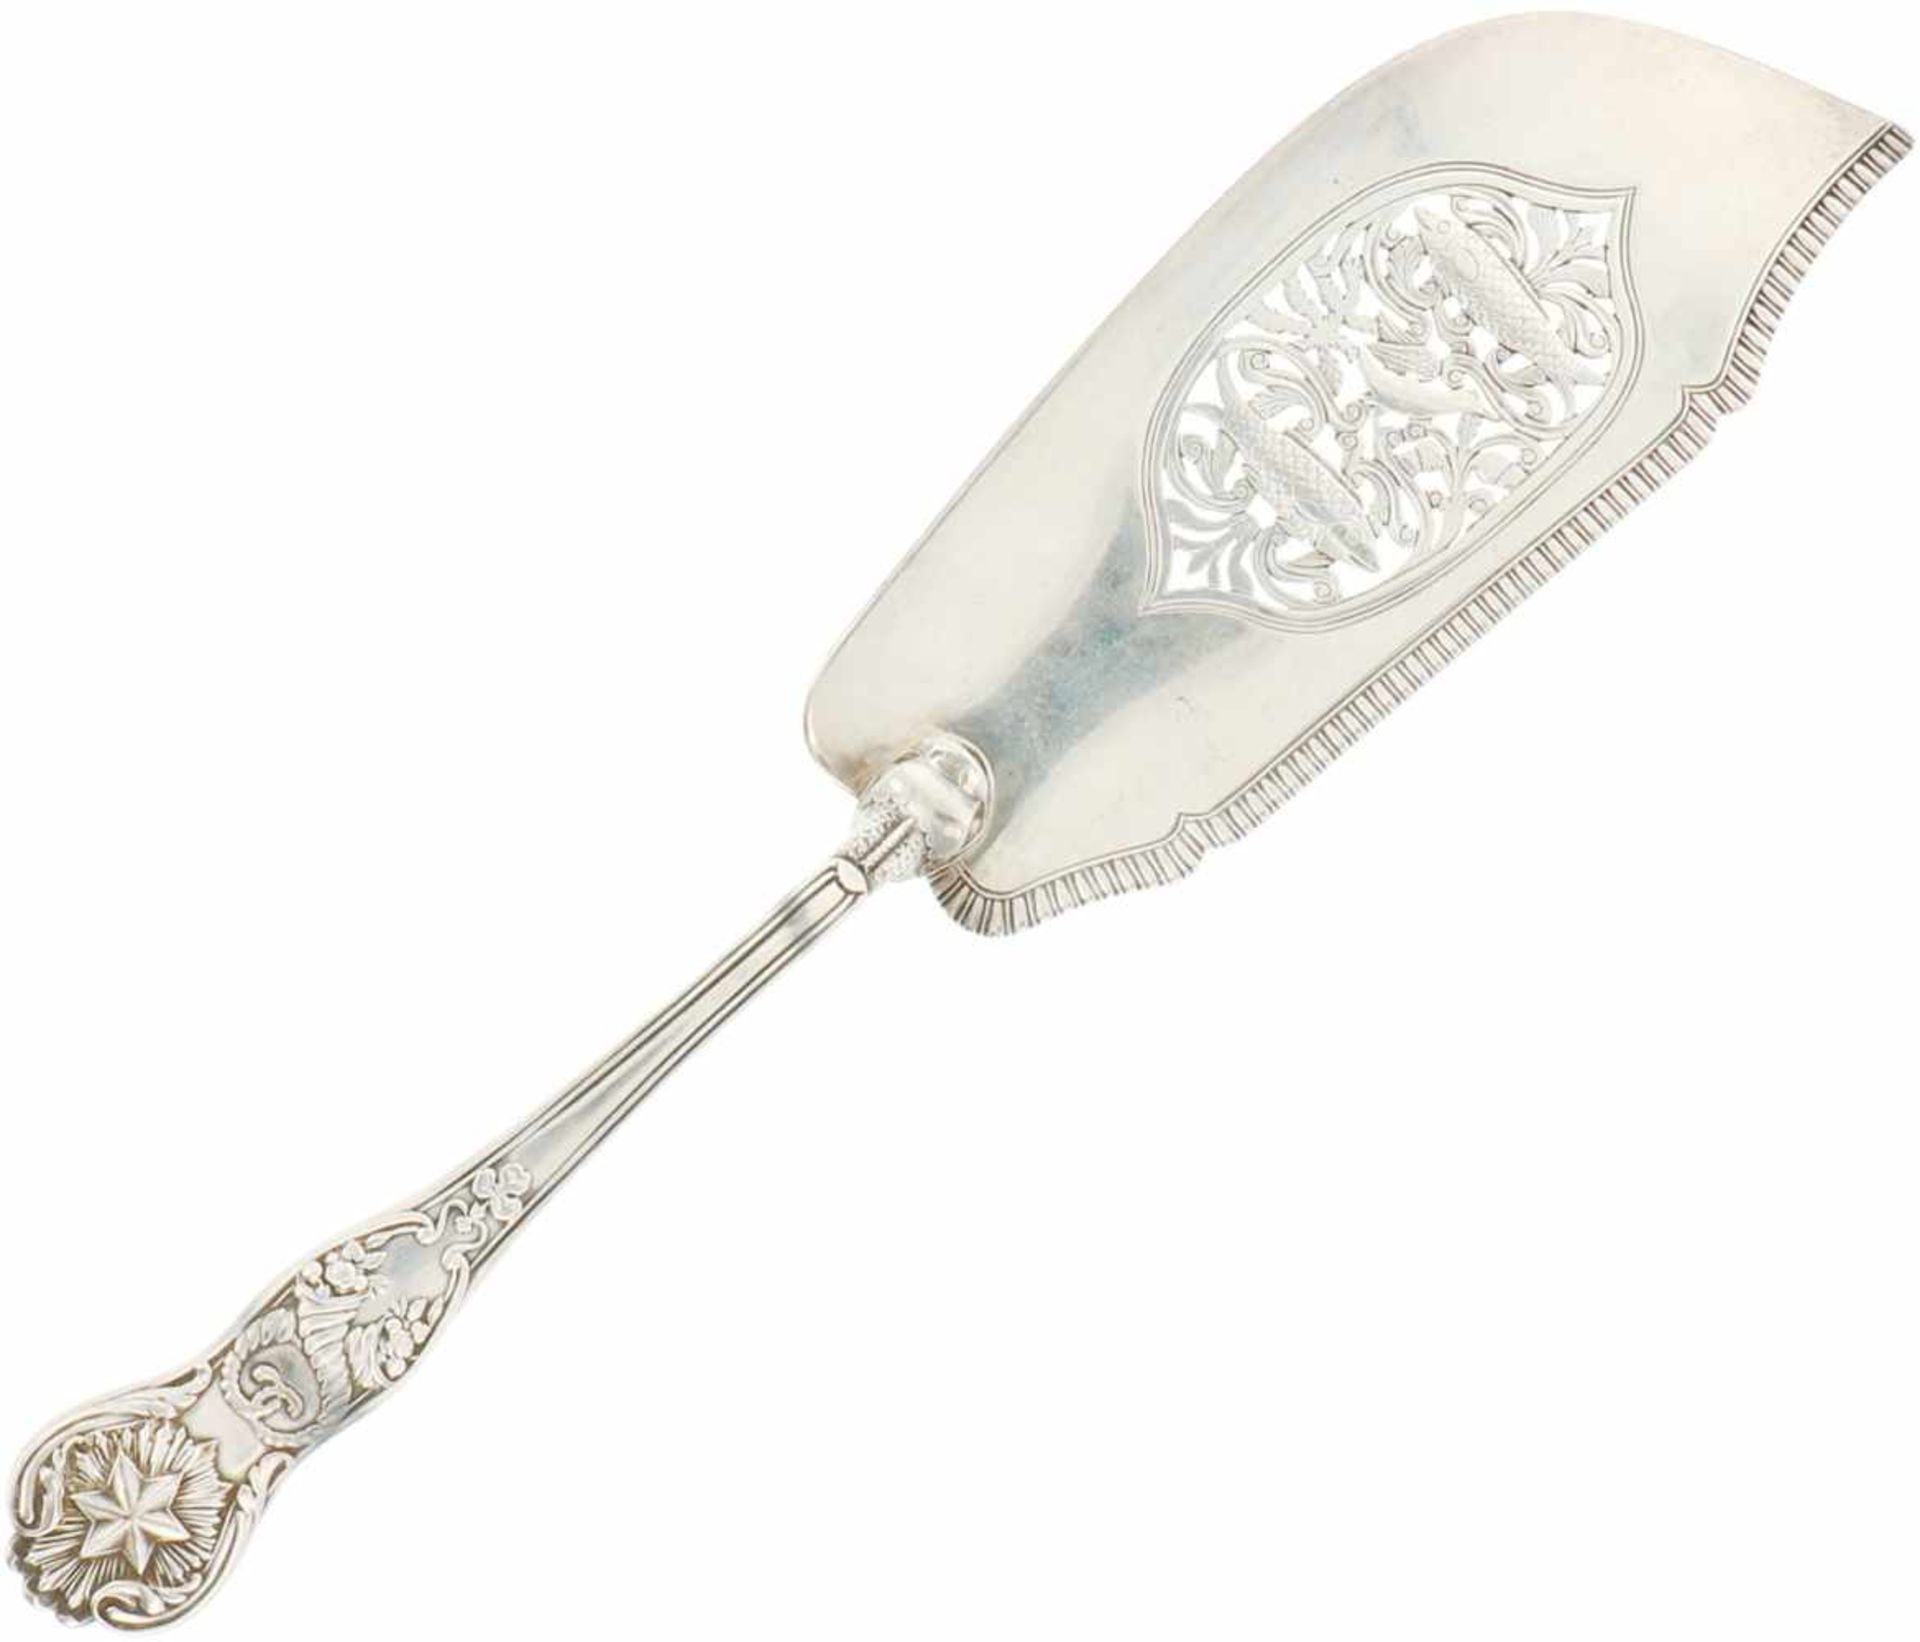 Silver fish serving scoop.